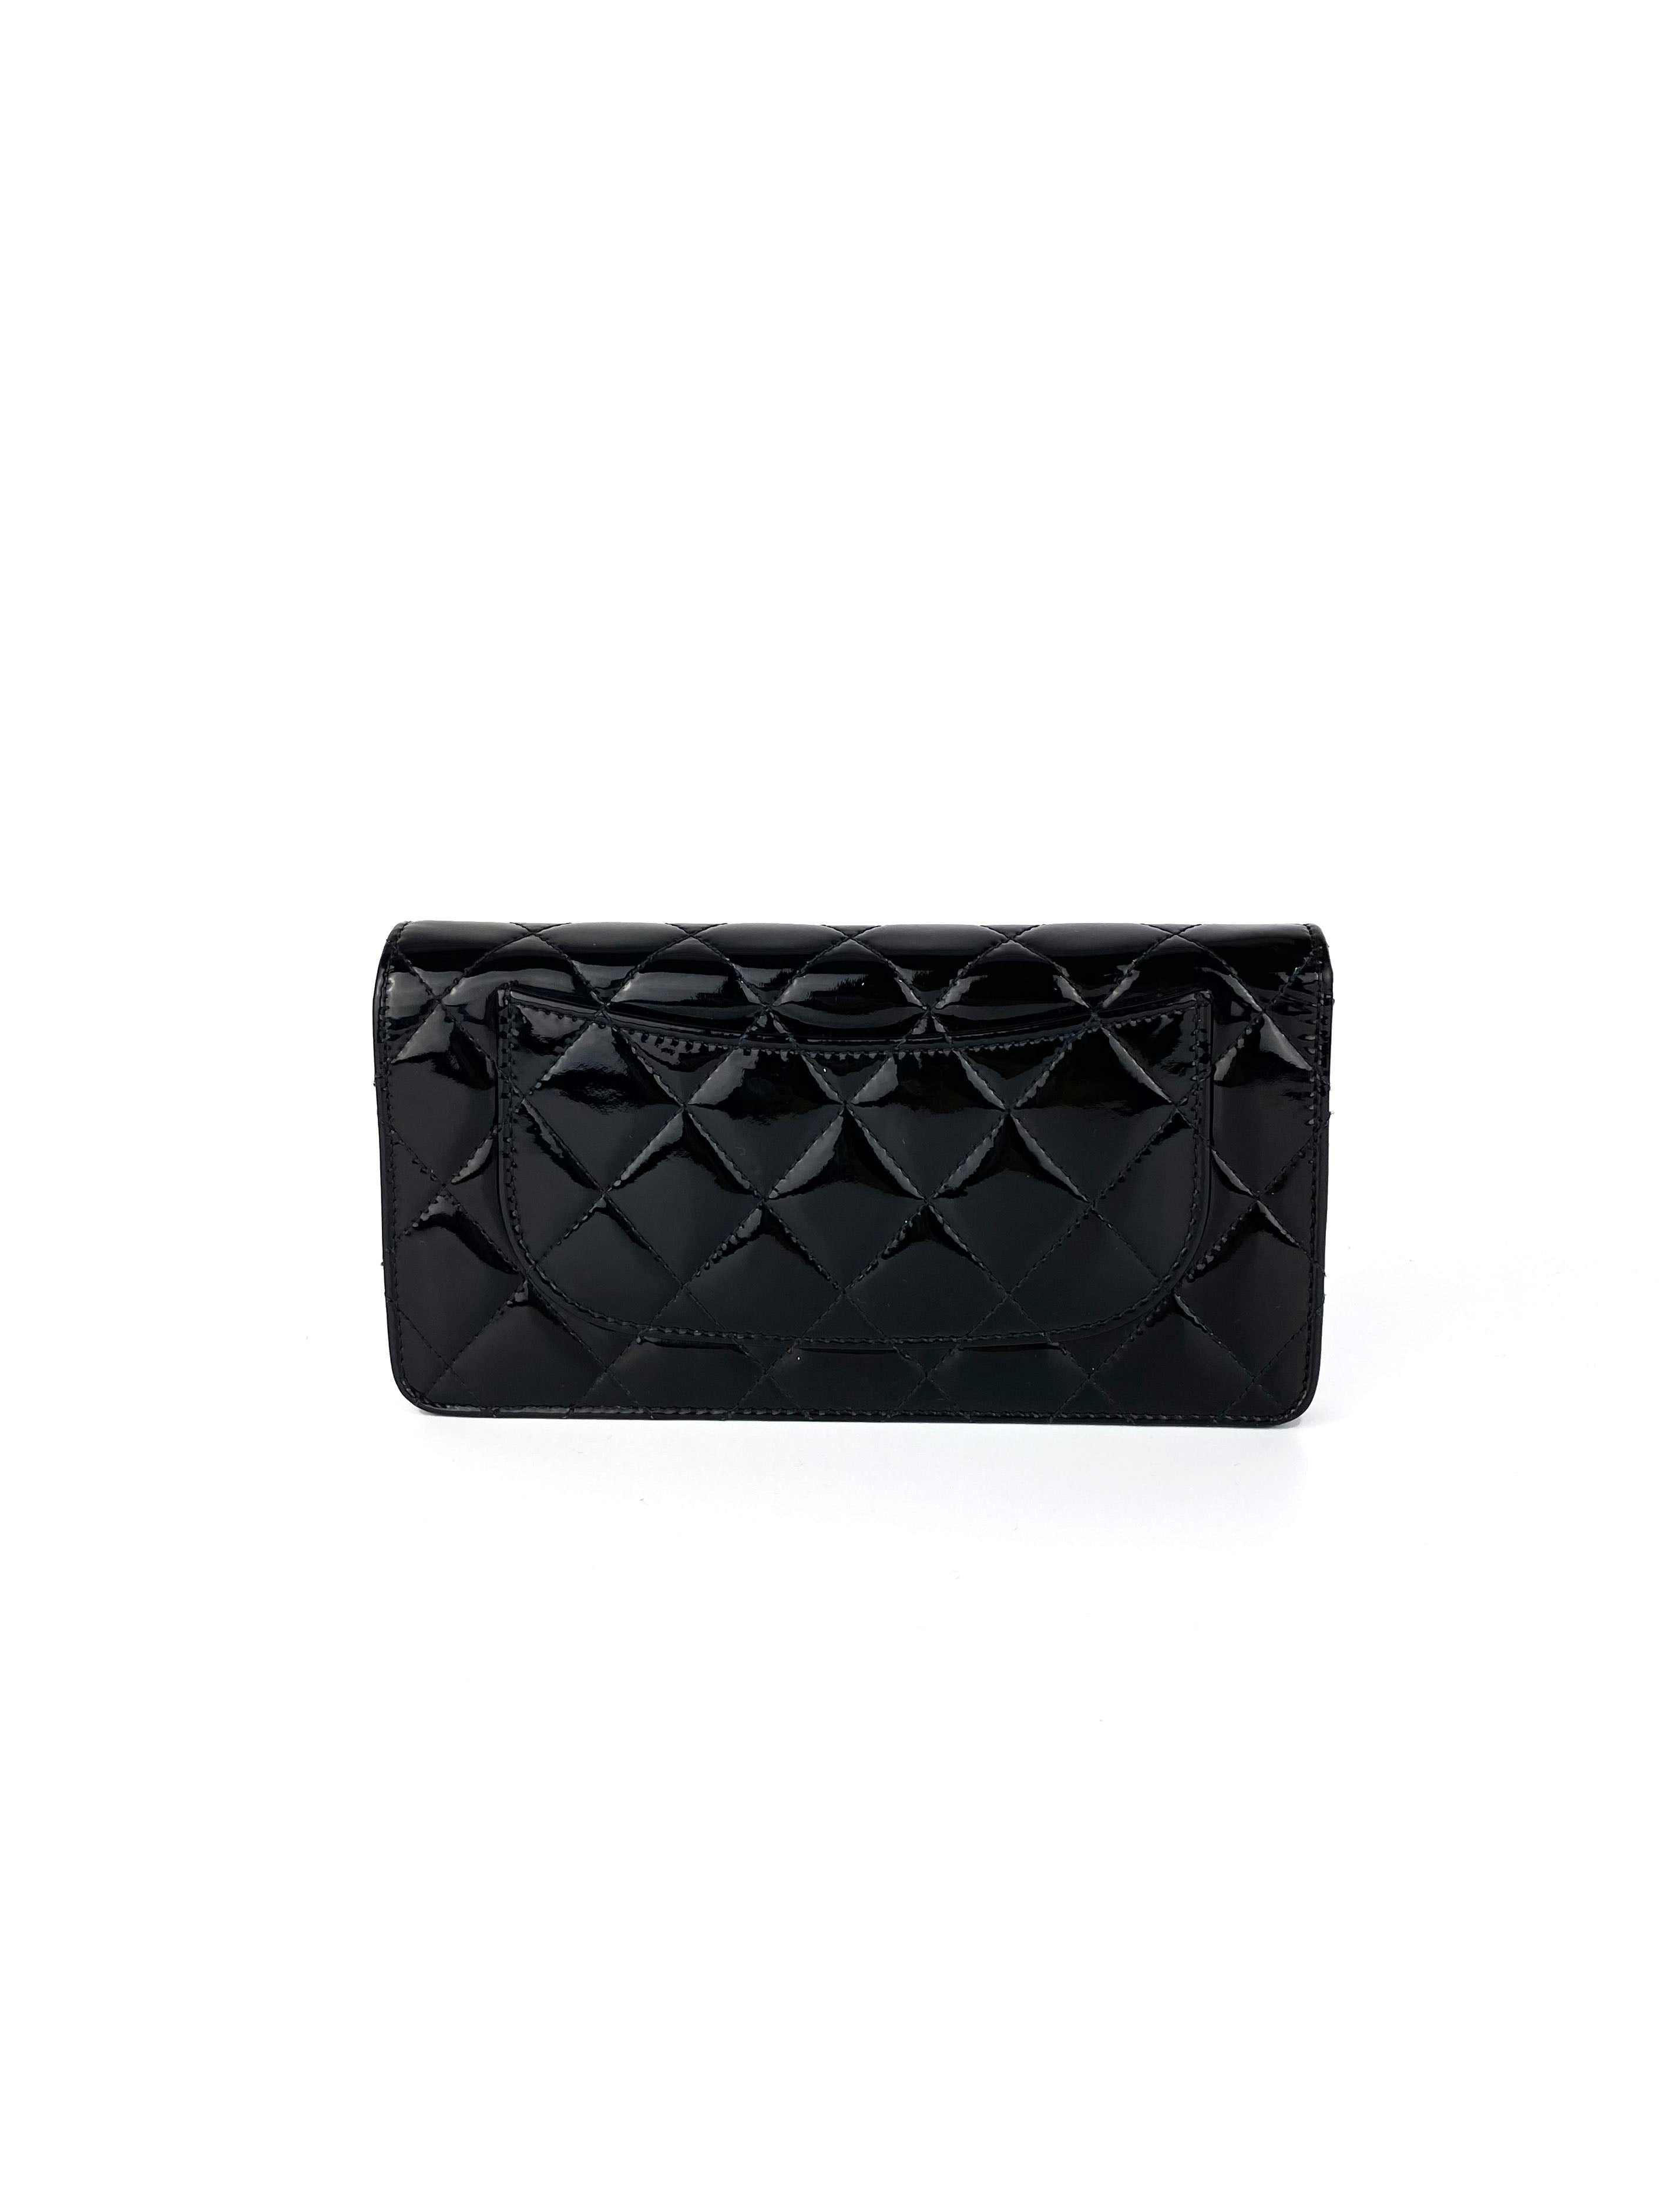 Chanel Black Patent Leather Wallet